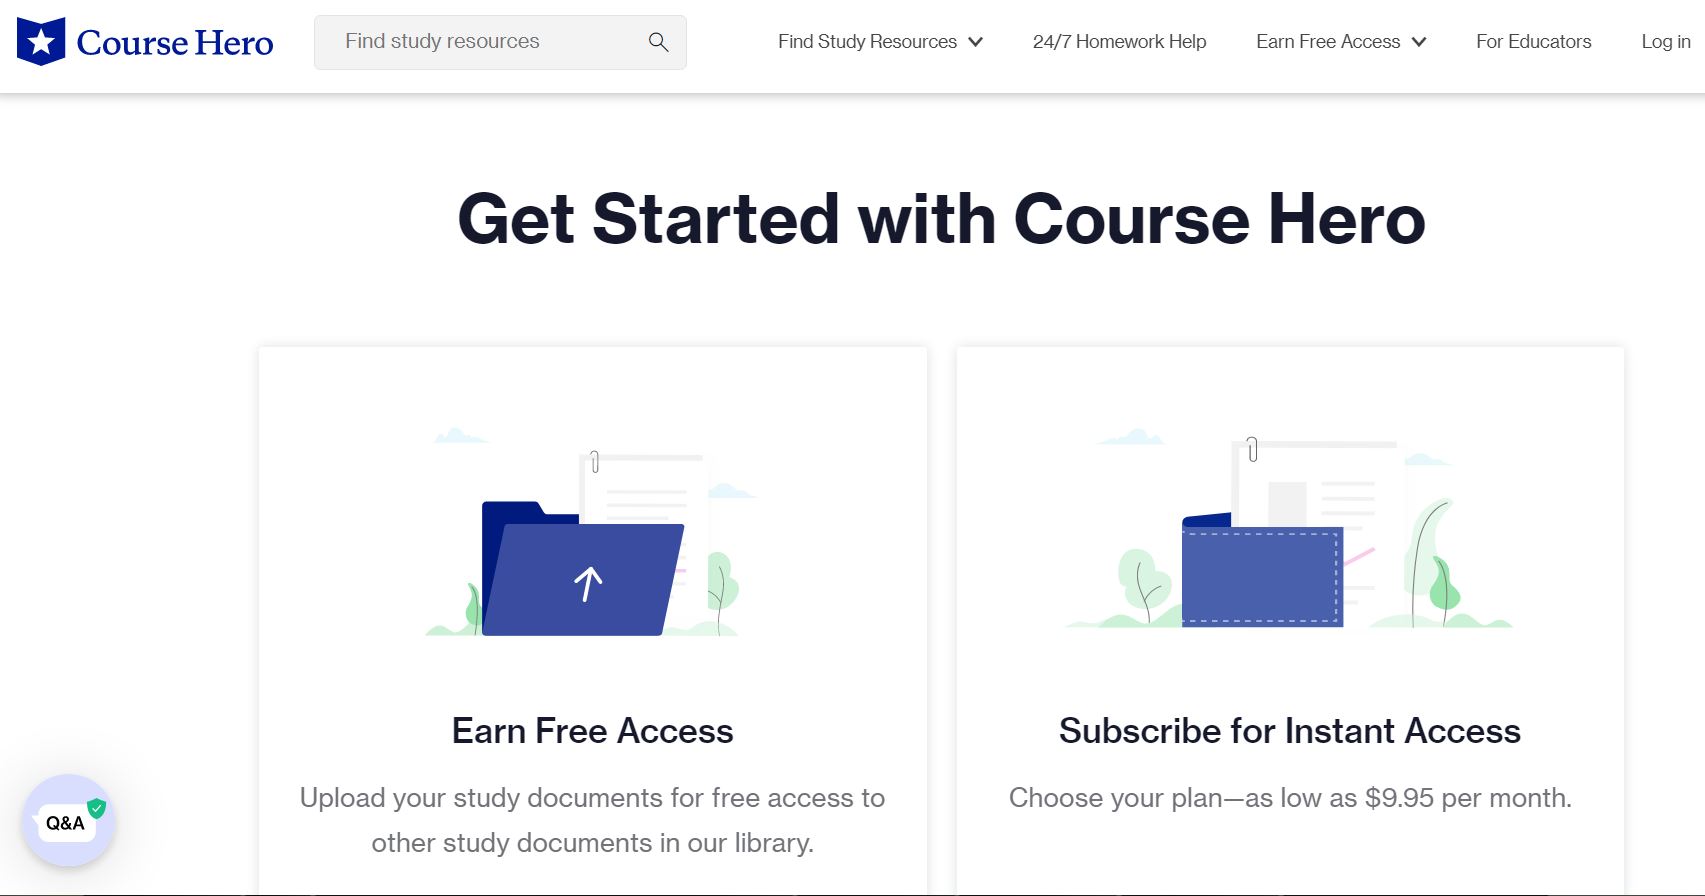 Course Hero product / service